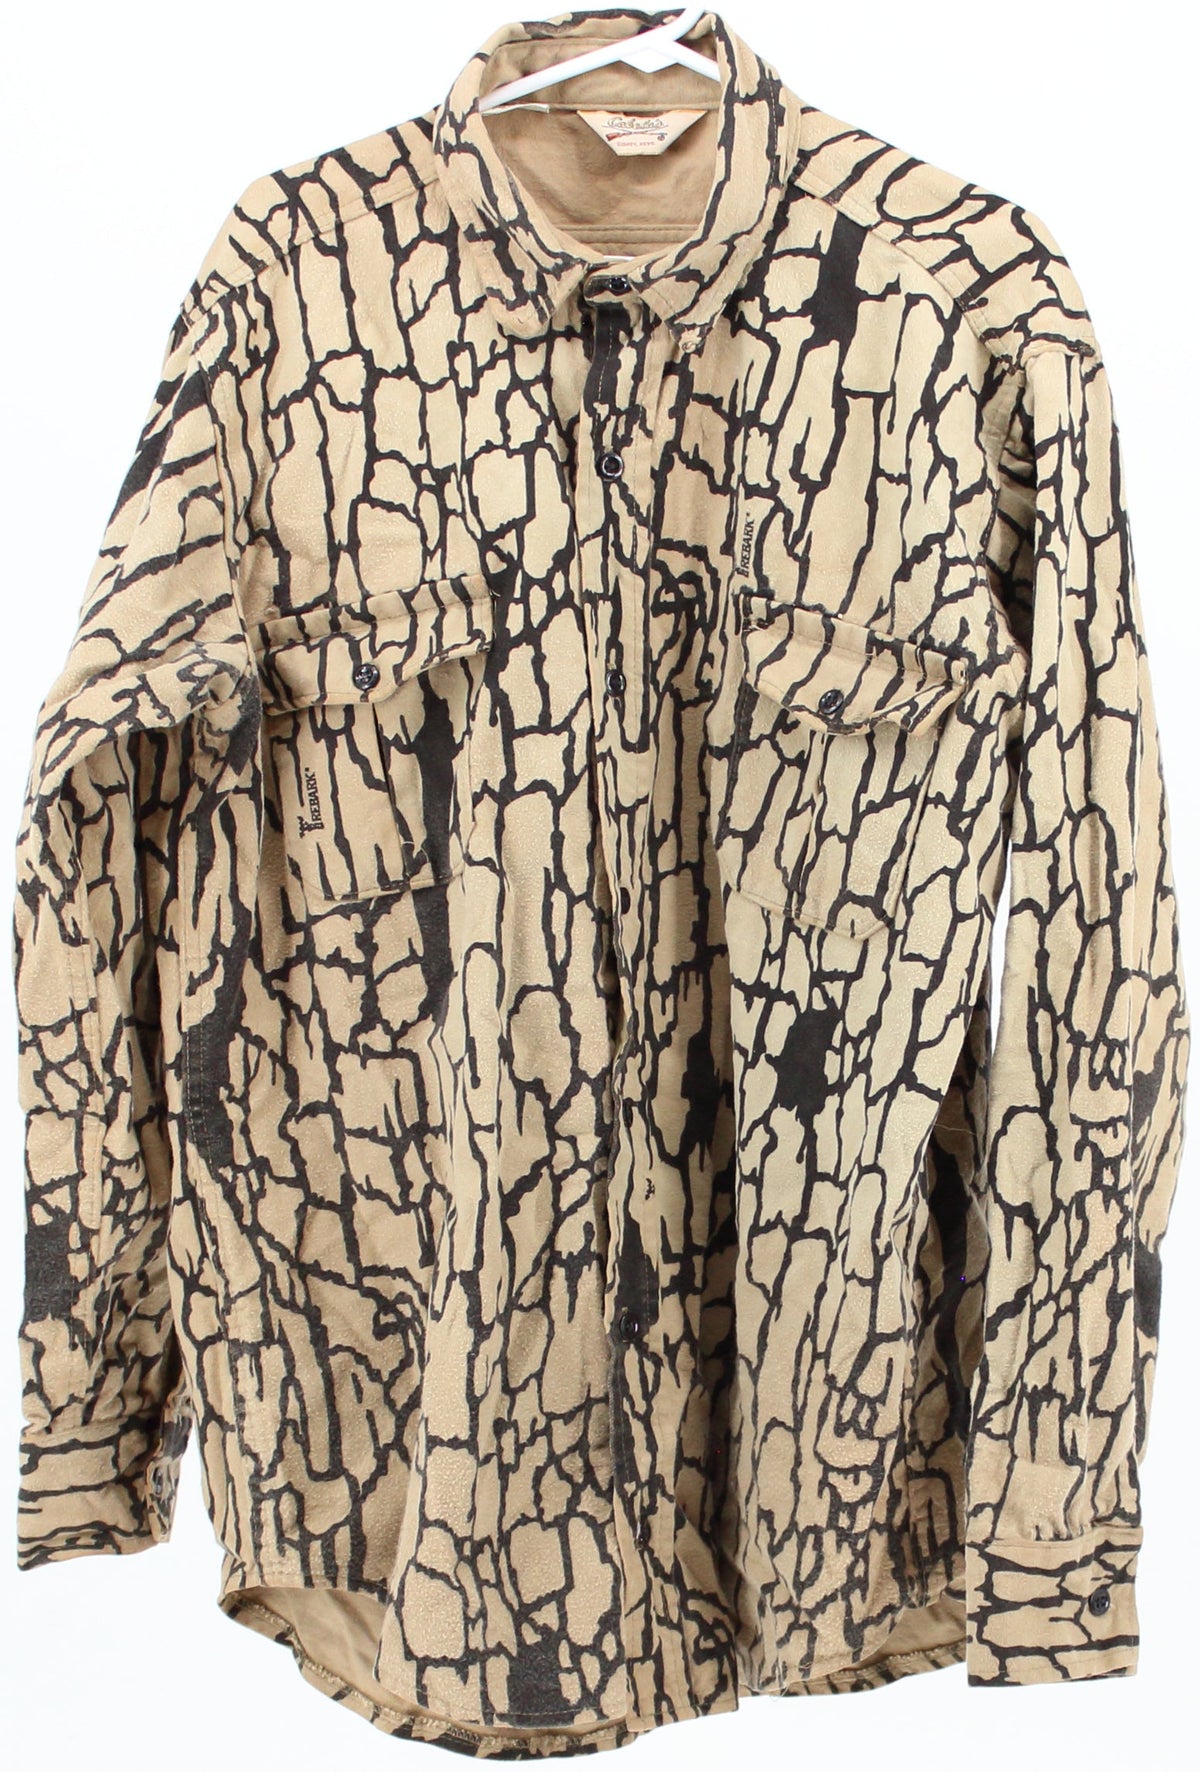 Cabela's Beige and Black Printed Flannel Shirt